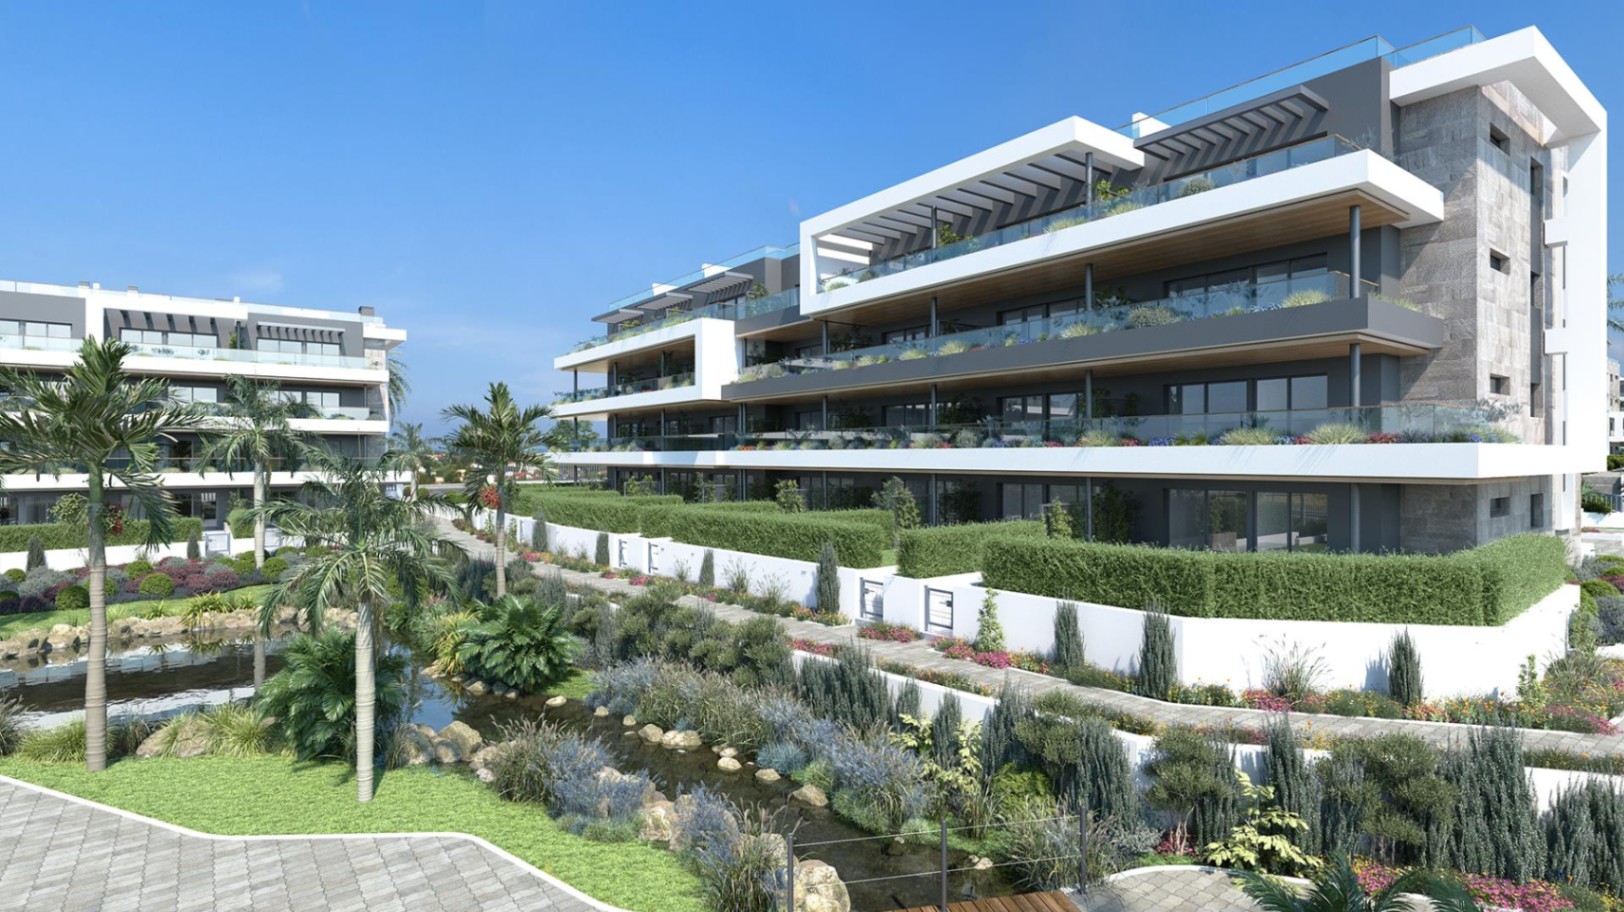 Apartments, bungalows, semi-detached and detached villas with magnificent communal areas in Torrevieja